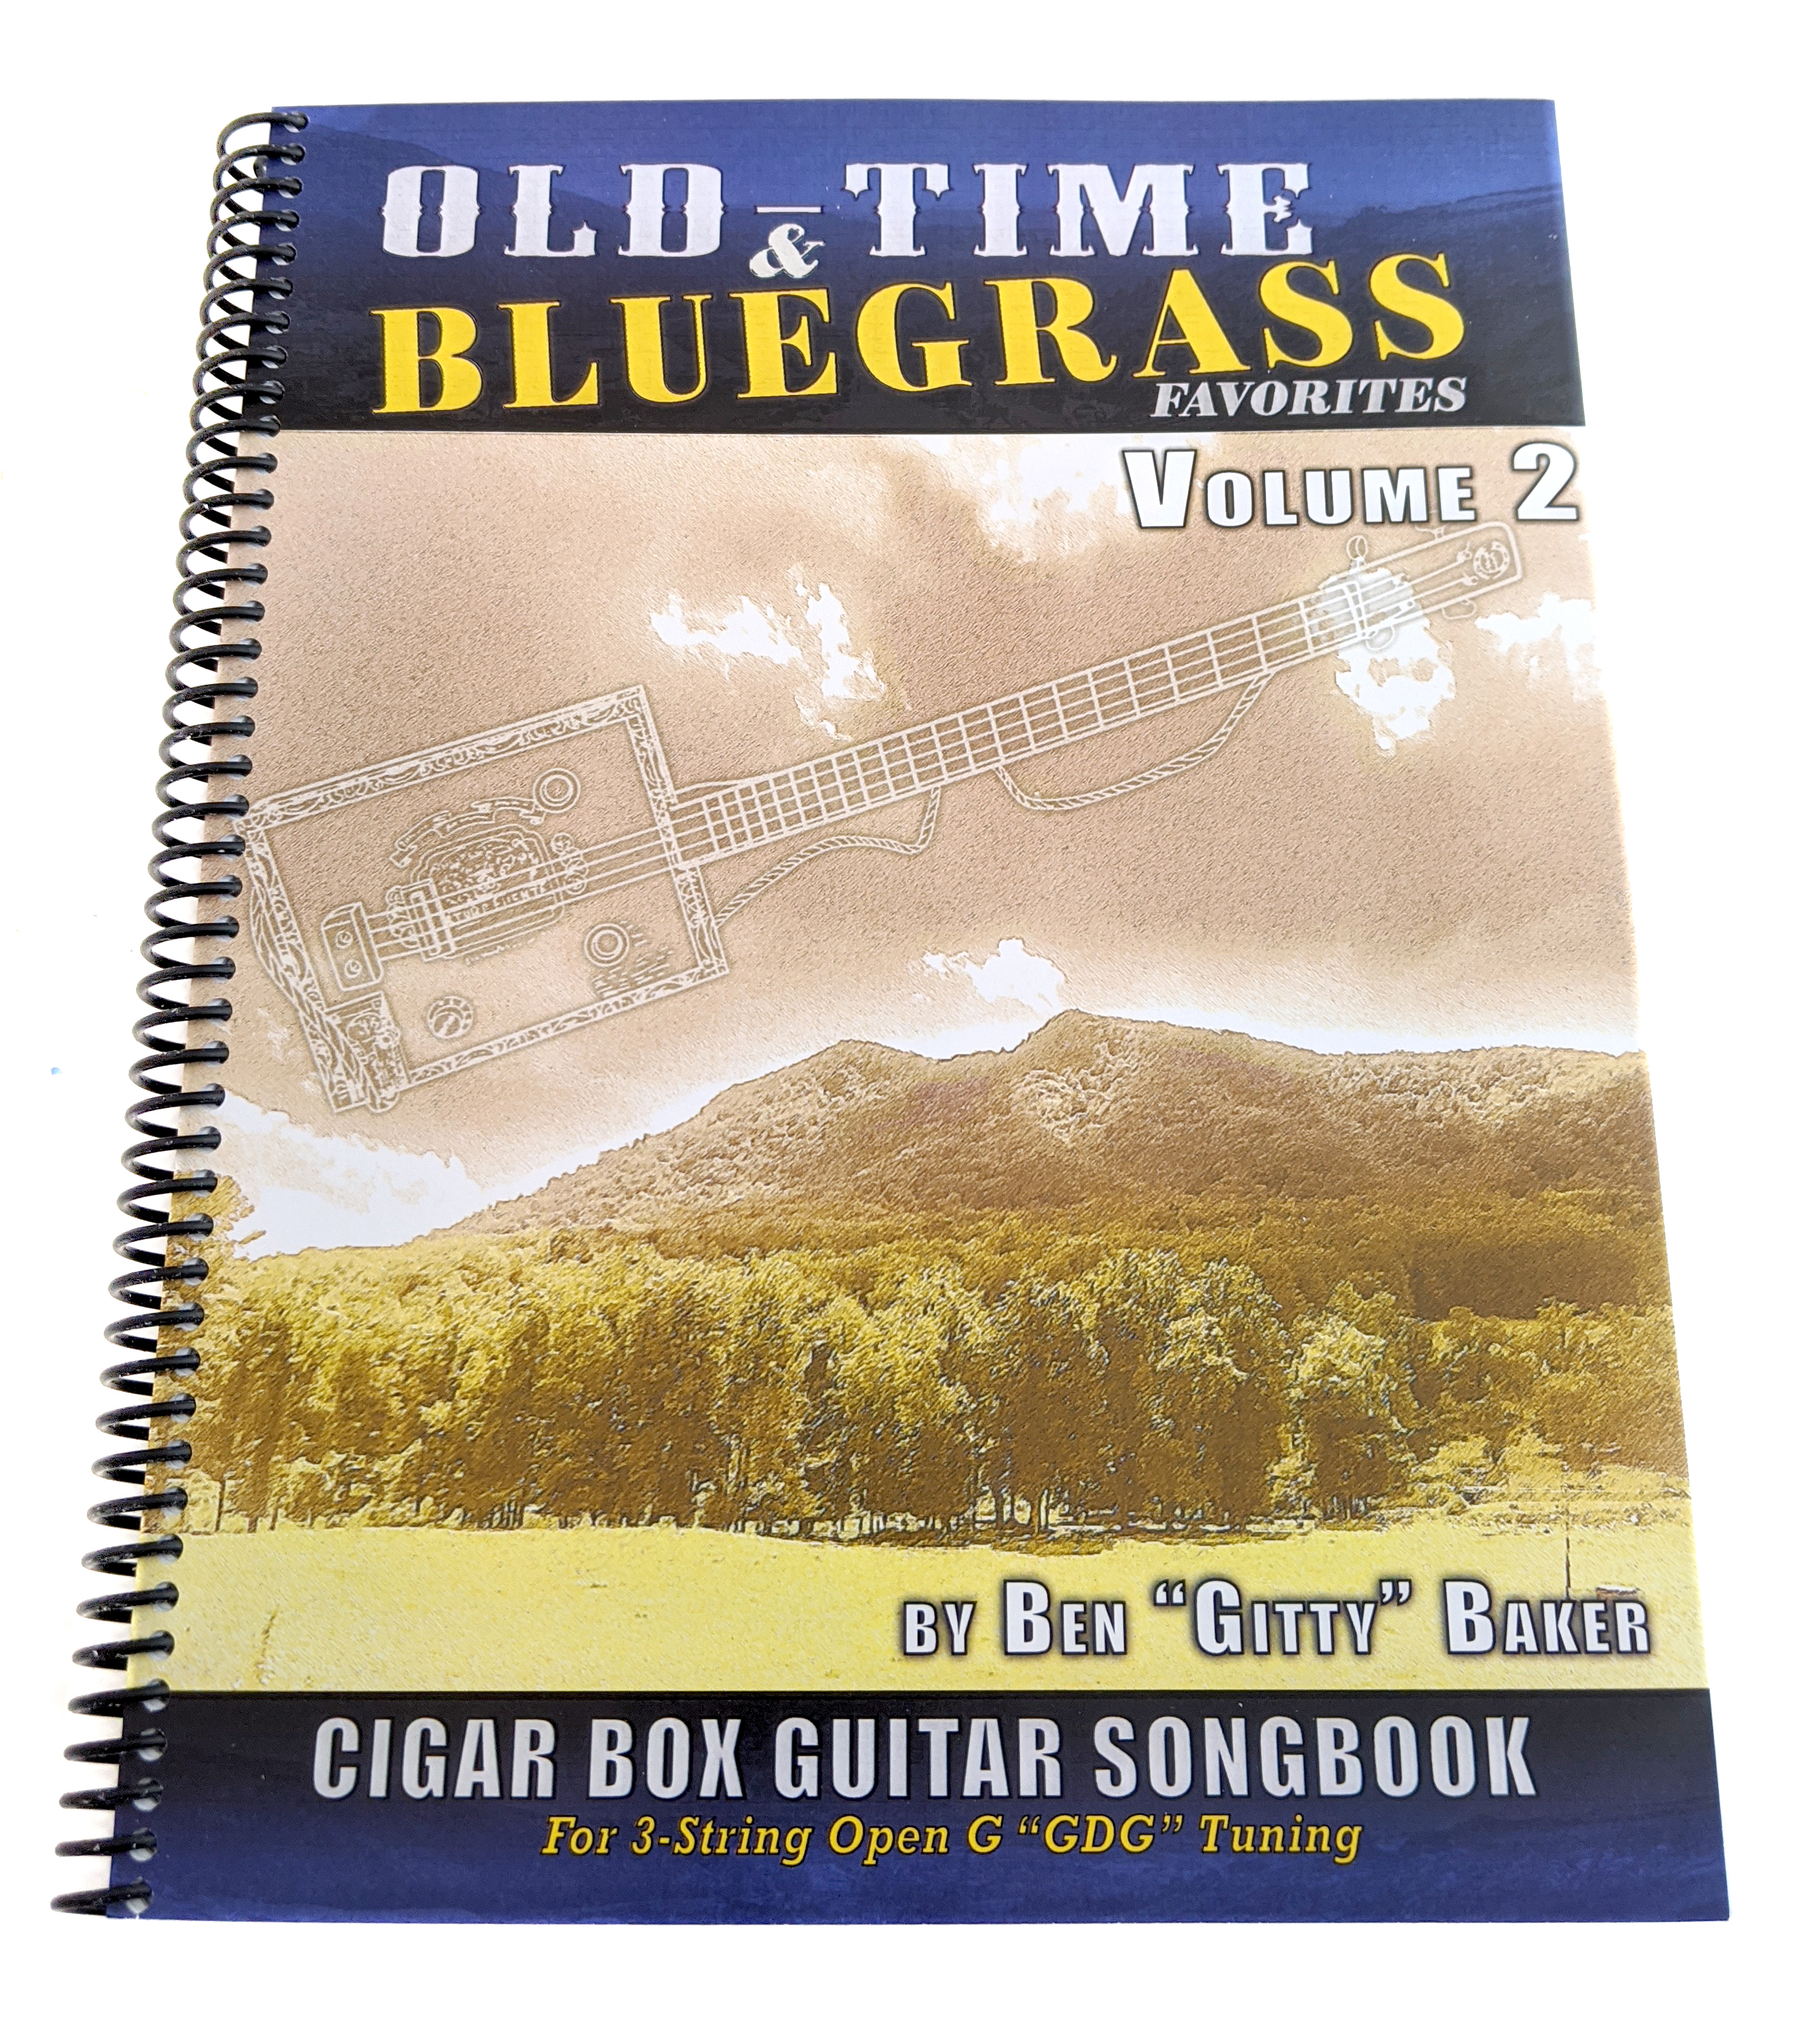 Old-Time and Bluegrass Favorites Cigar Box Guitar Songbook - Volume 2 (Limited-Edition Spiral-Bound Version)